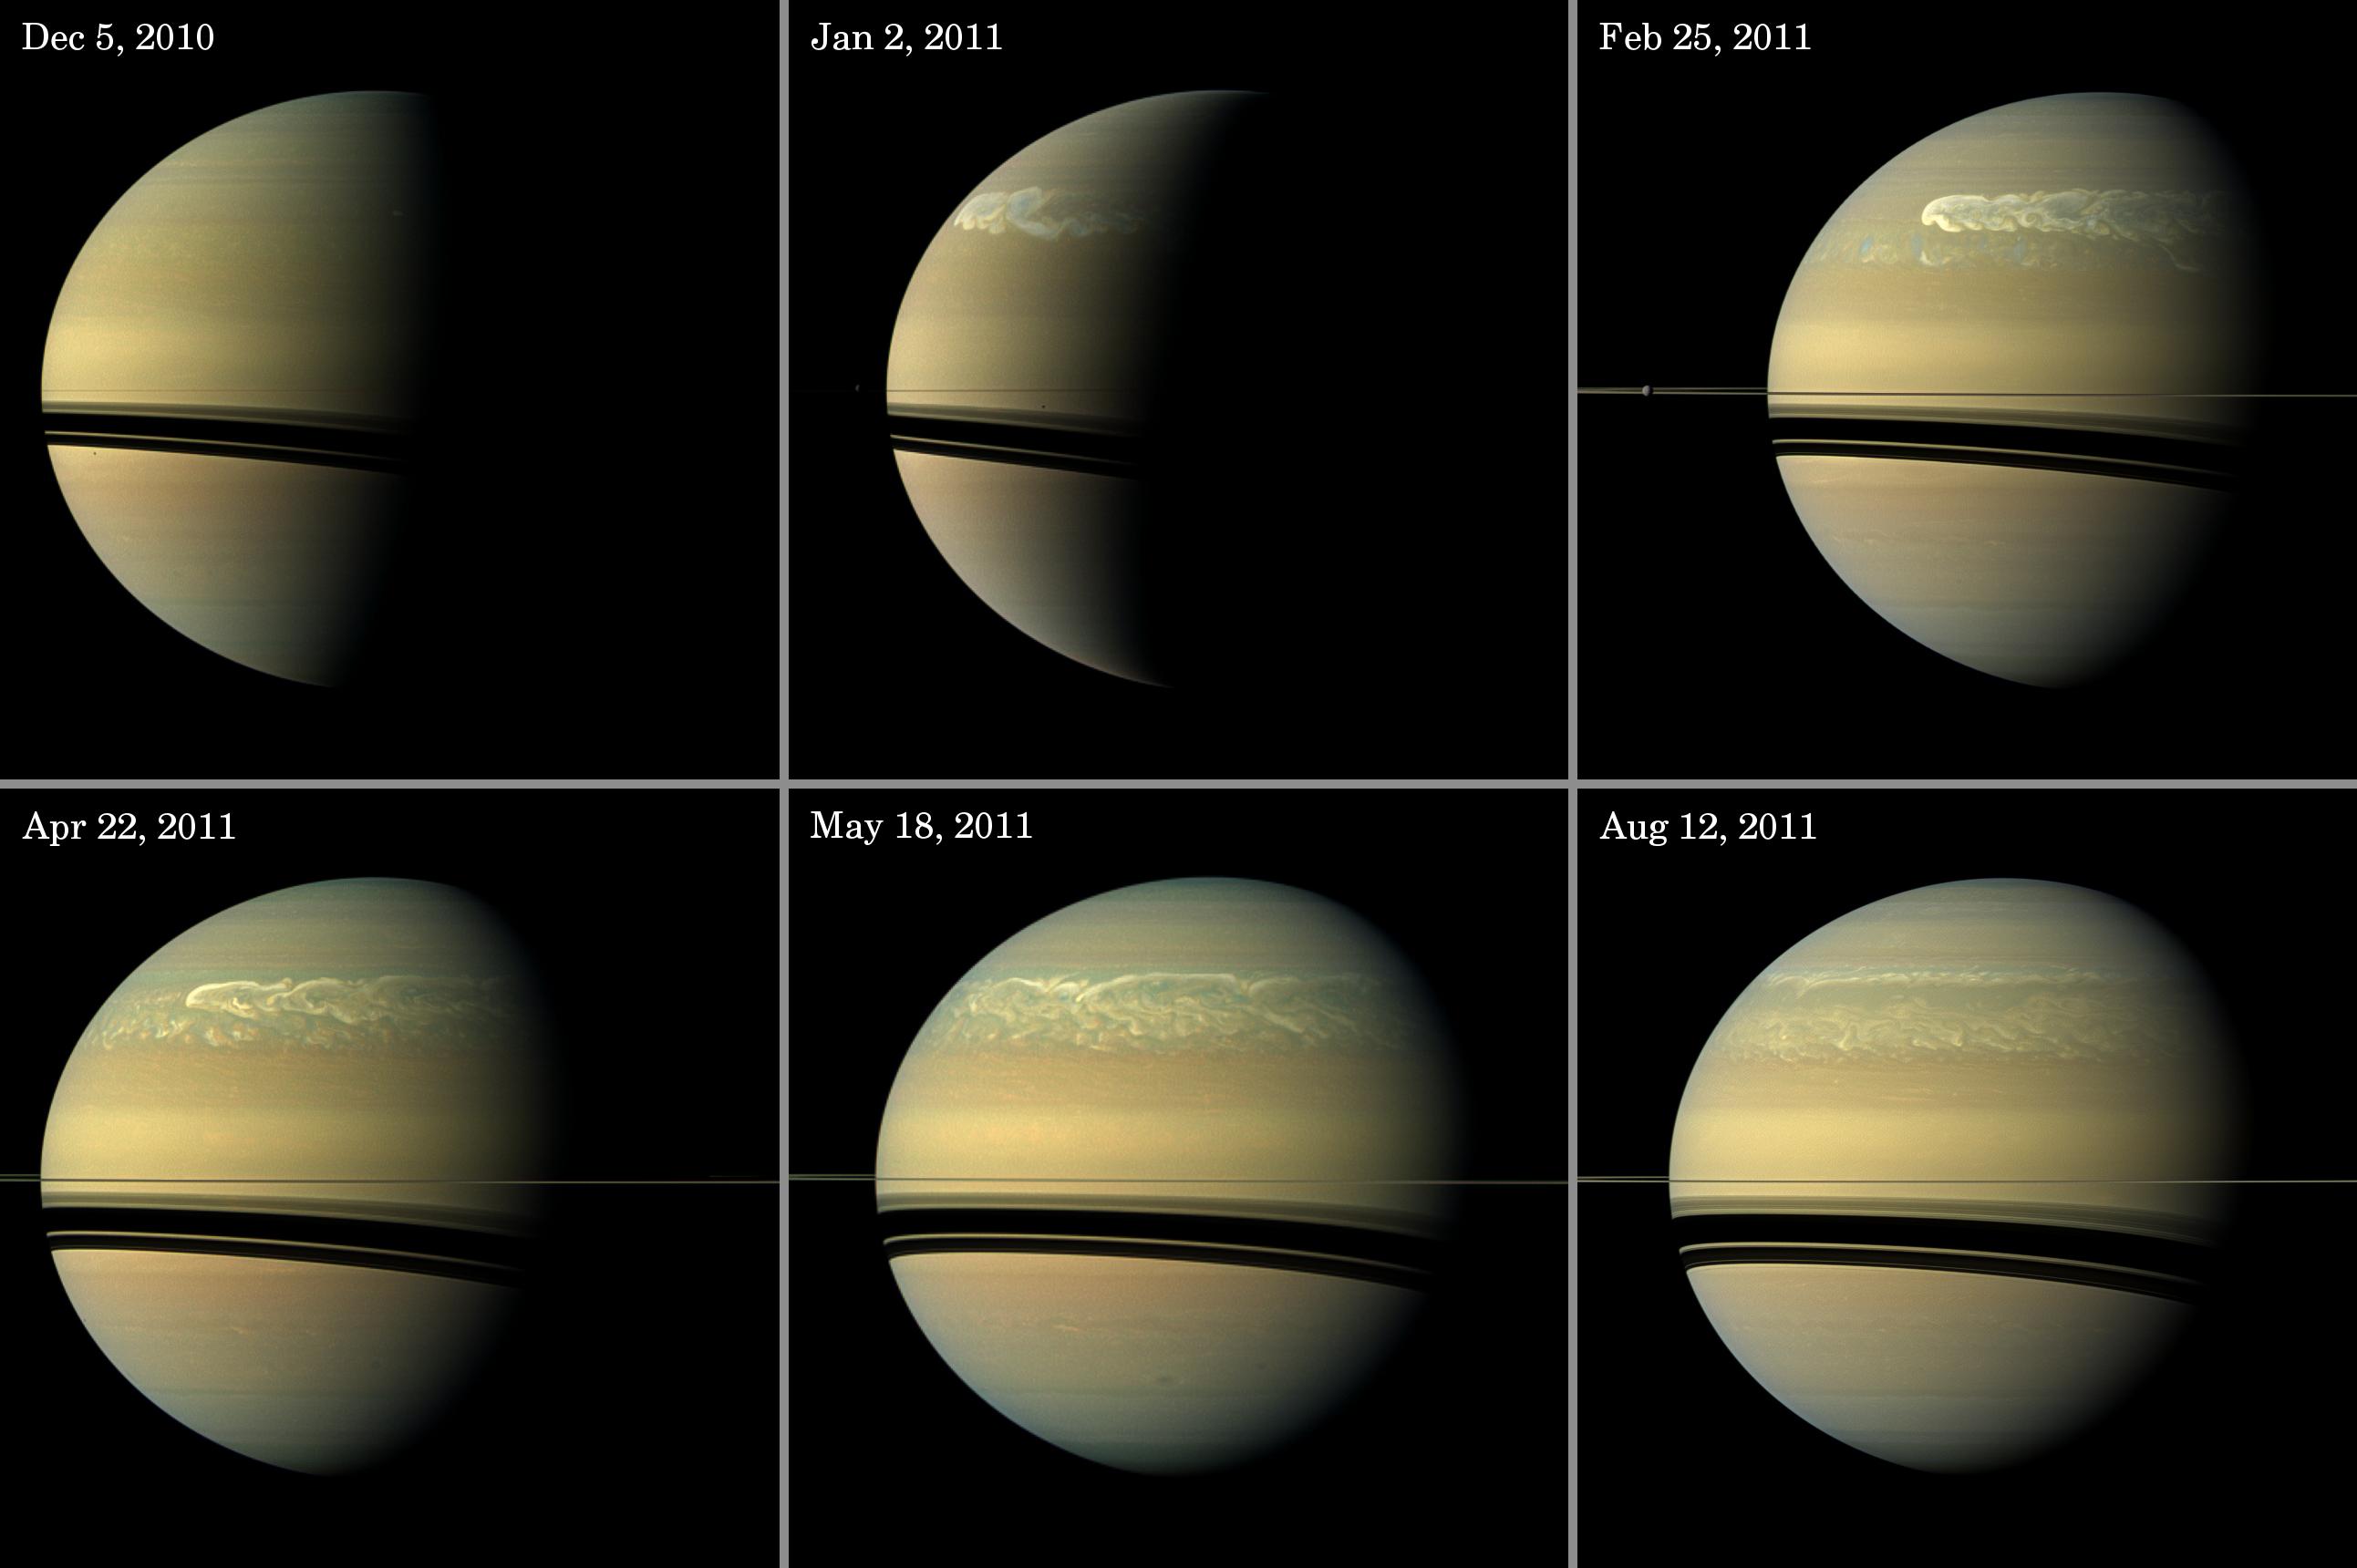 Sequence of images showing massive band of storms encircling Saturn.